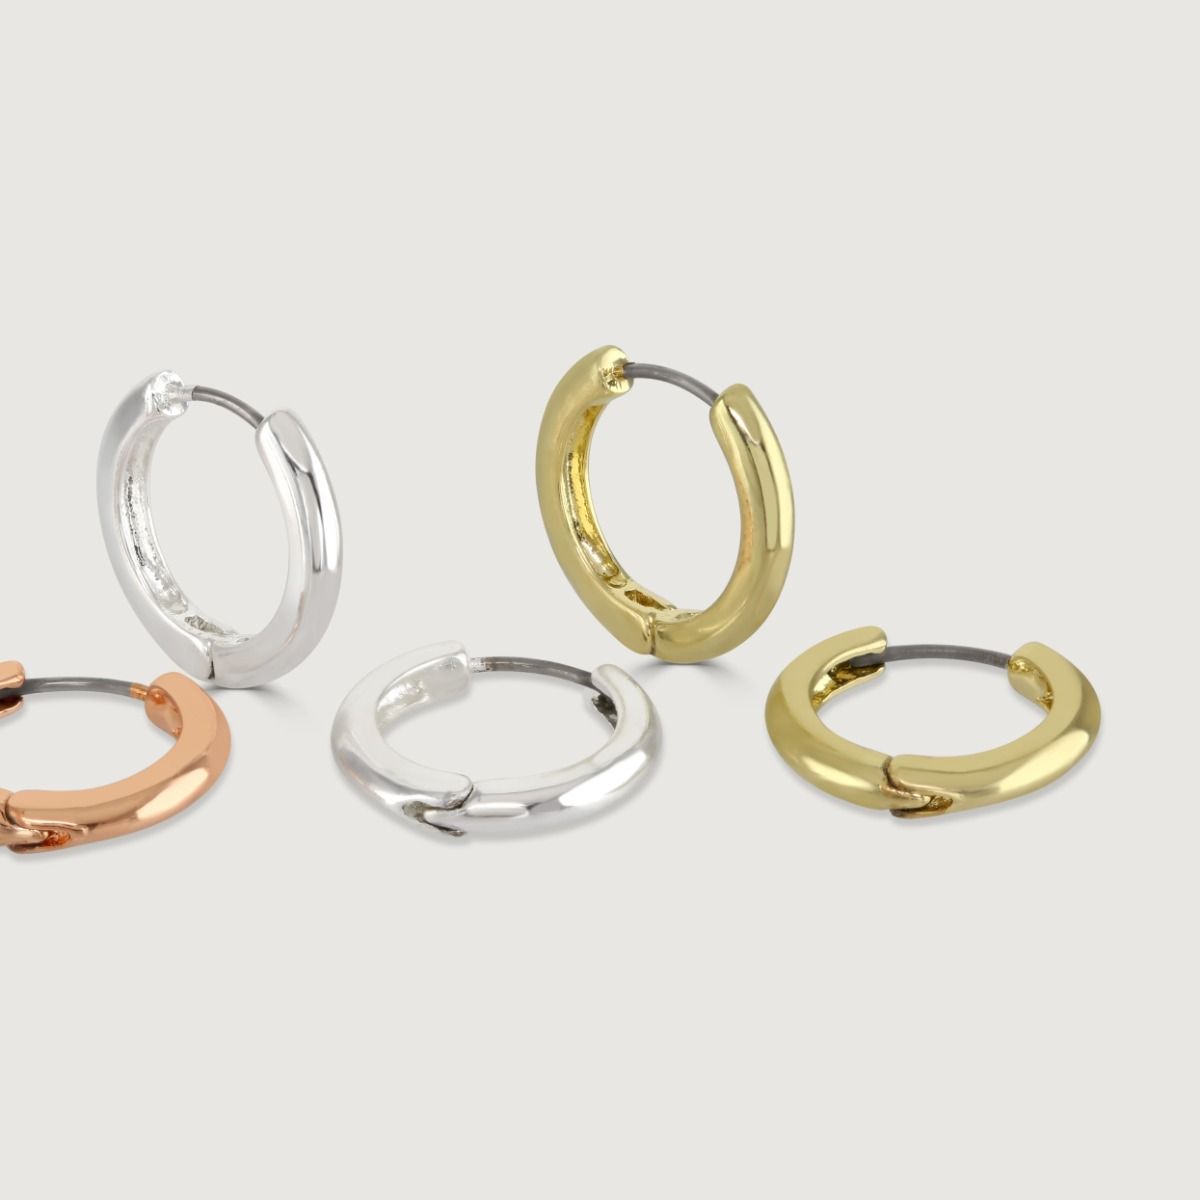 
The Set of 3 Hoop Earrings offers versatility and style in one package. With three different metallic tones to choose from, these hoop earrings allow you to mix and match or wear them individually. Effortlessly elevate your look with this set, perfect f